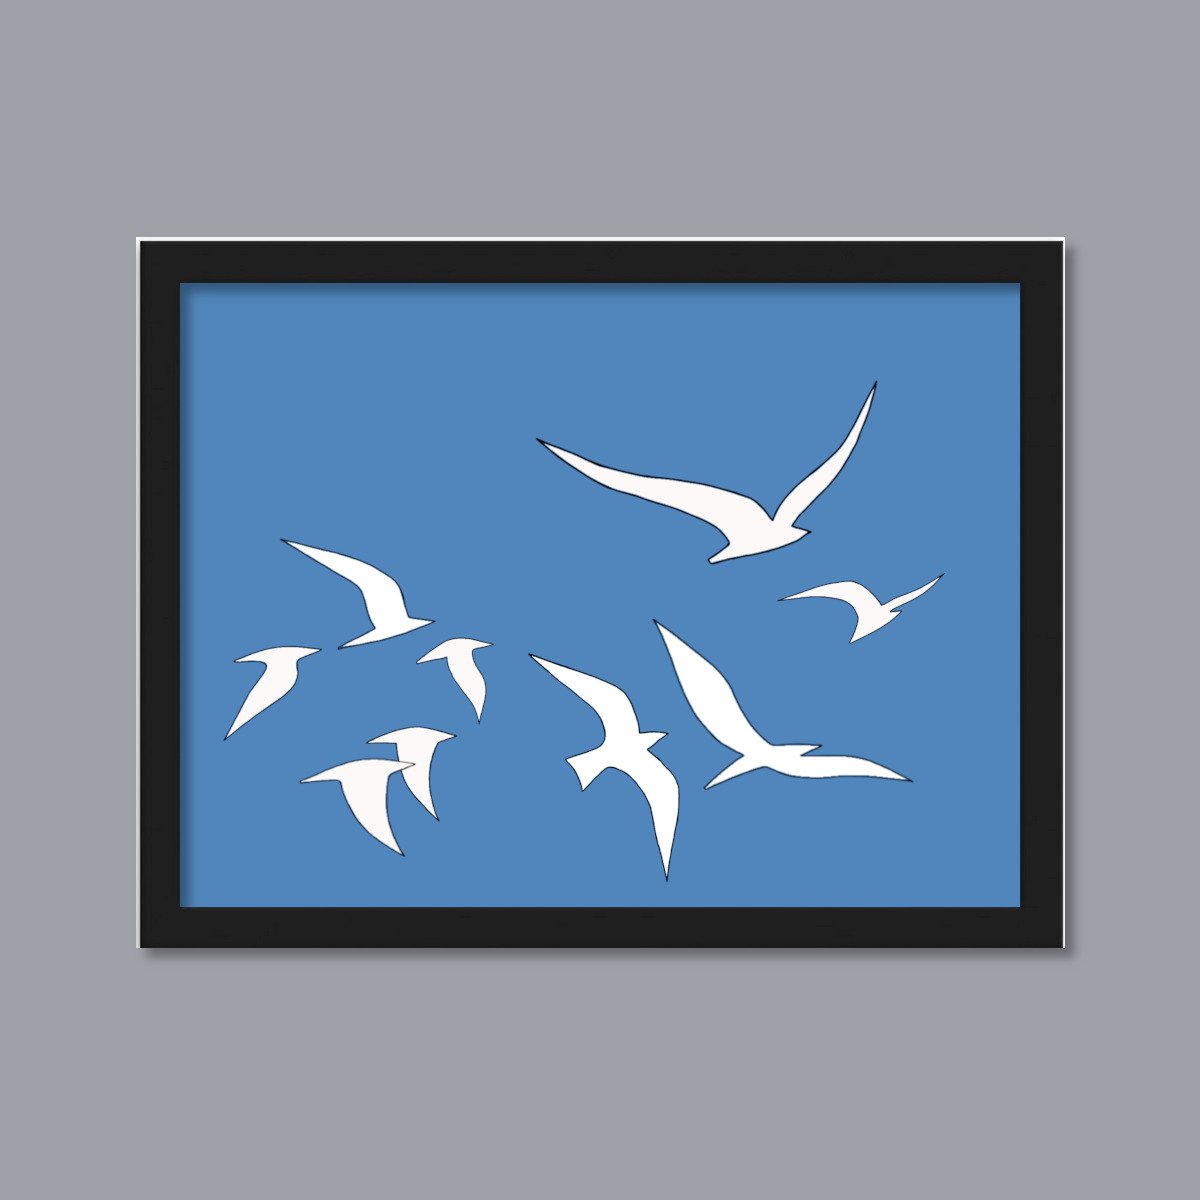 In the Sky #46 - Enhanced Matte Paper Framed Print - Ready to Hang by Marina Krylova